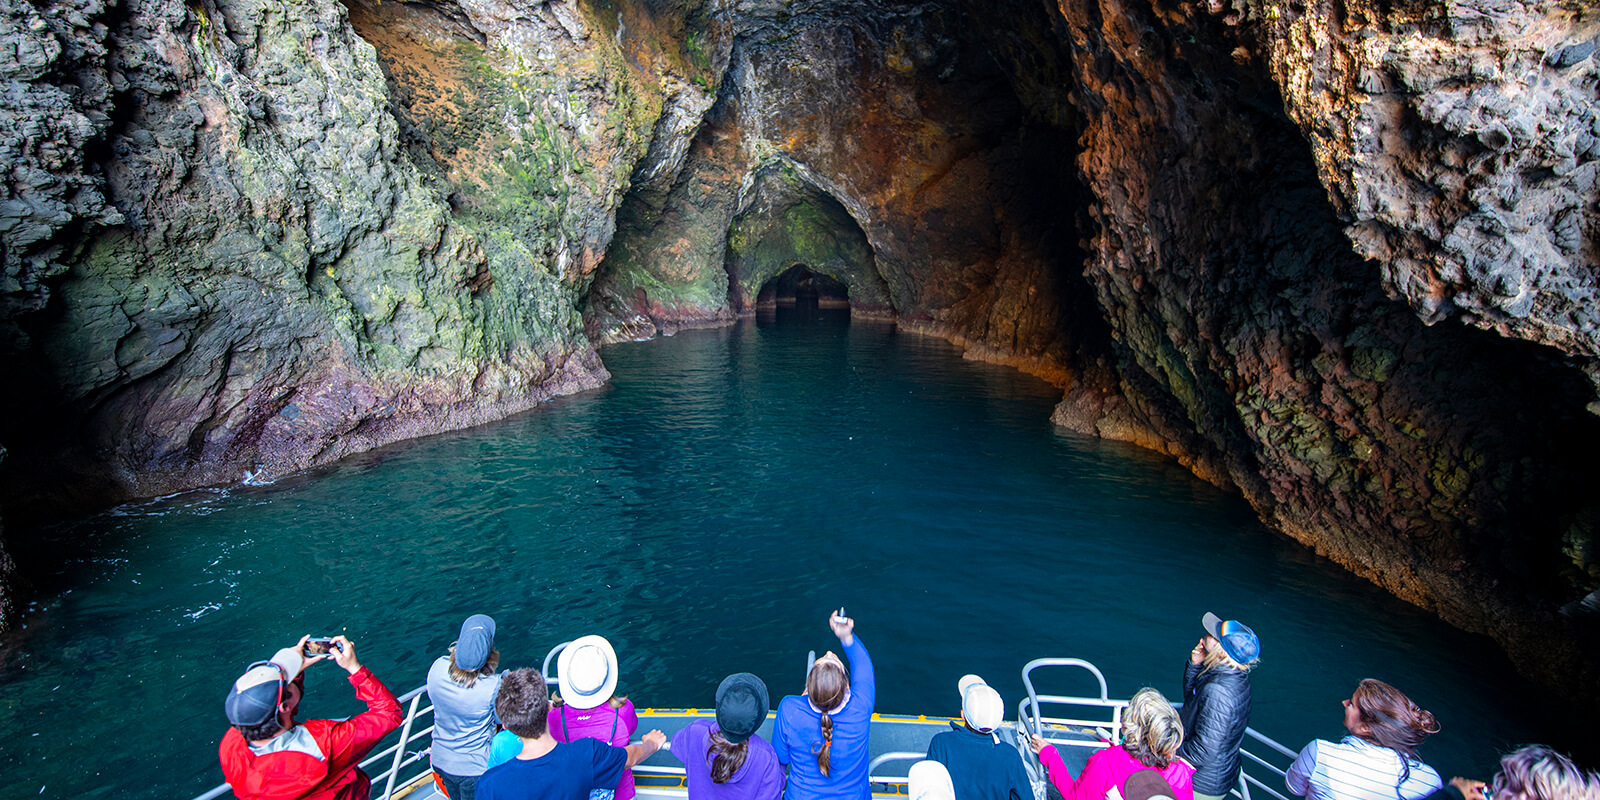 People on a boat take photographs of the entrance to a cave